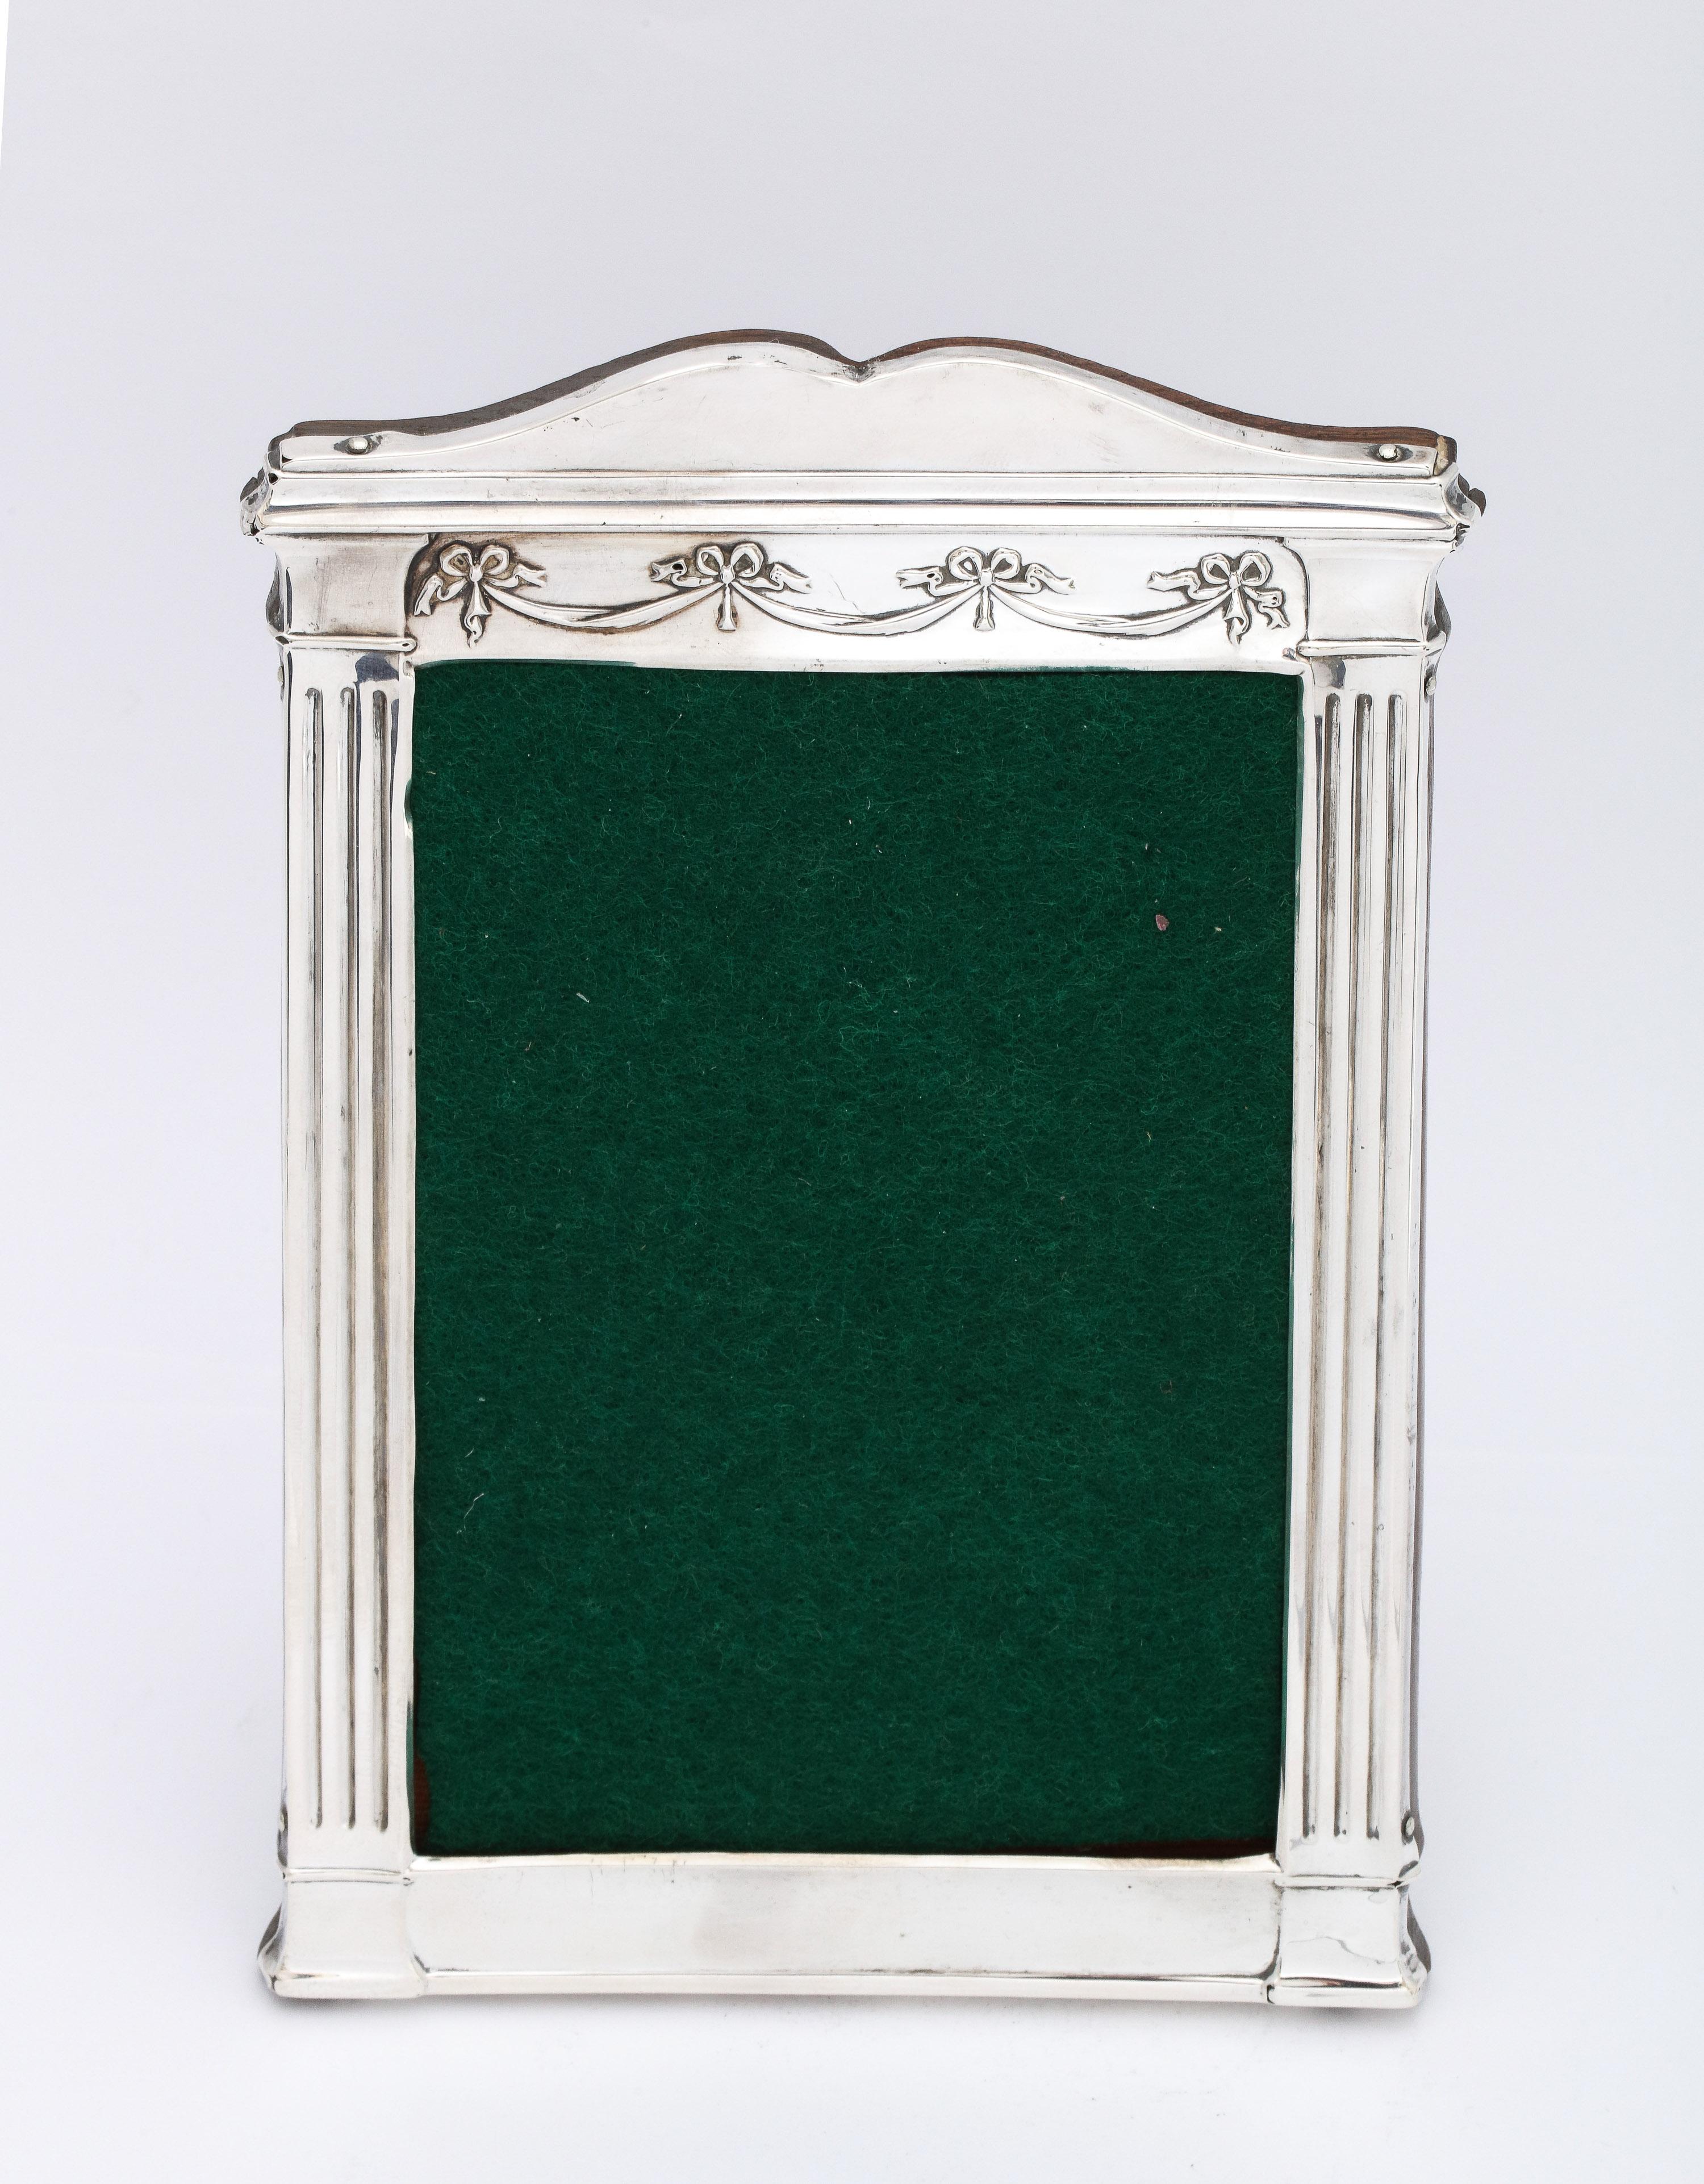 Unusual, Edwardian Period, Neoclassical style, sterling silver wood-backed picture frame, Birmingham, England, year-hallmarked for 1911, H. Matthews - maker. Designed with swags that drape across the top of the frame and column-form pilasters on the